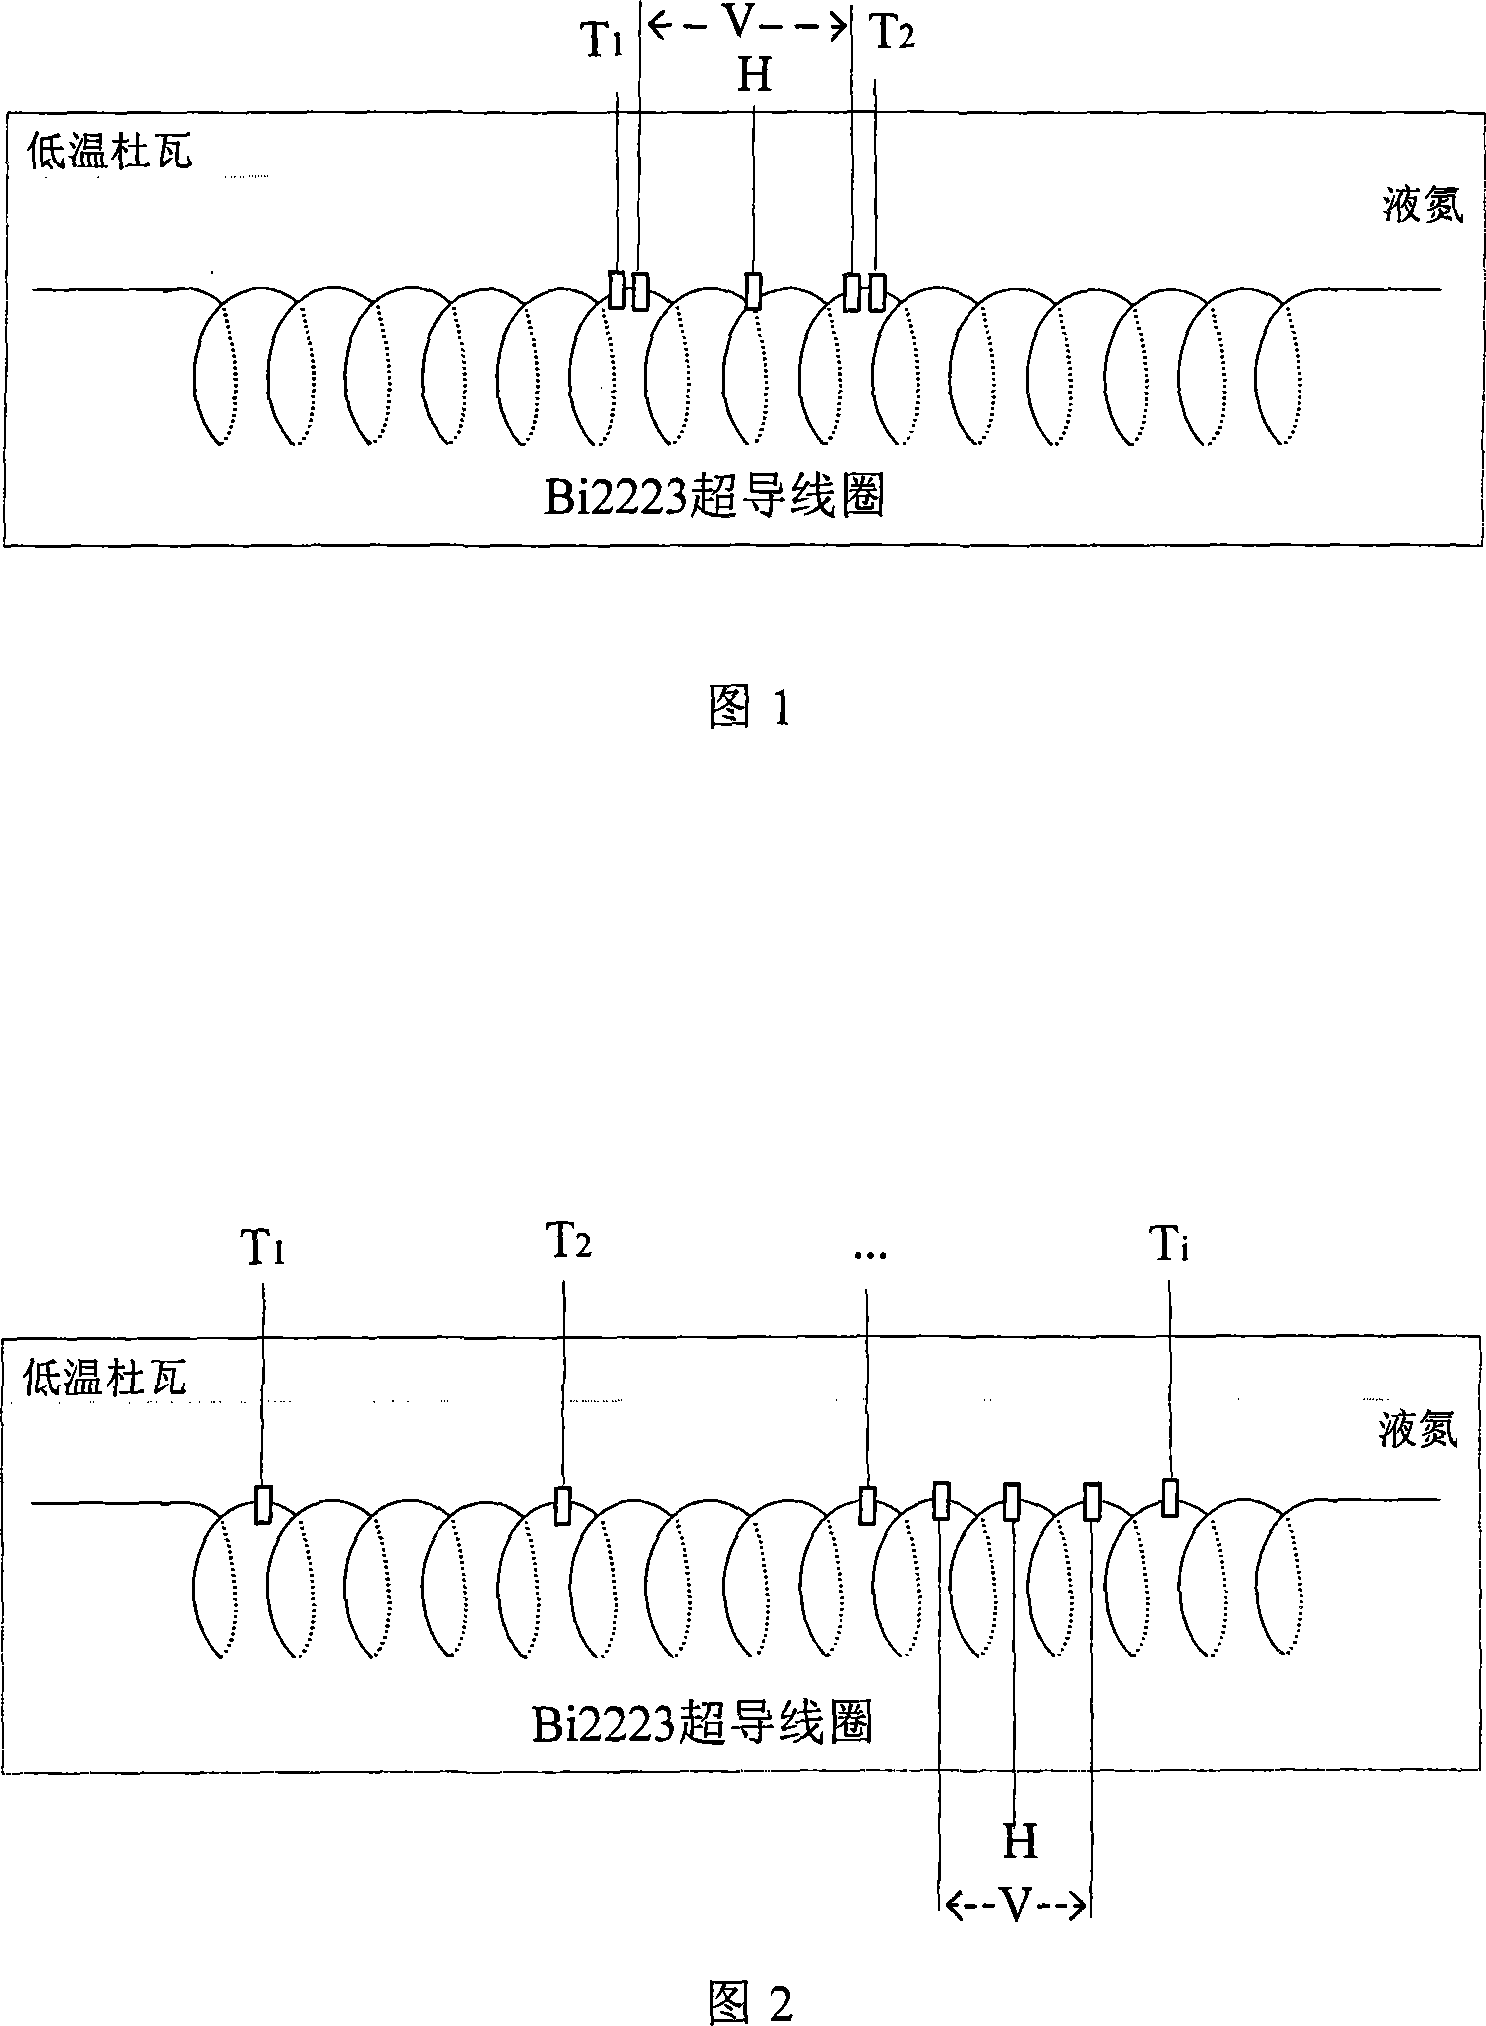 Superconducting coil quench detection method